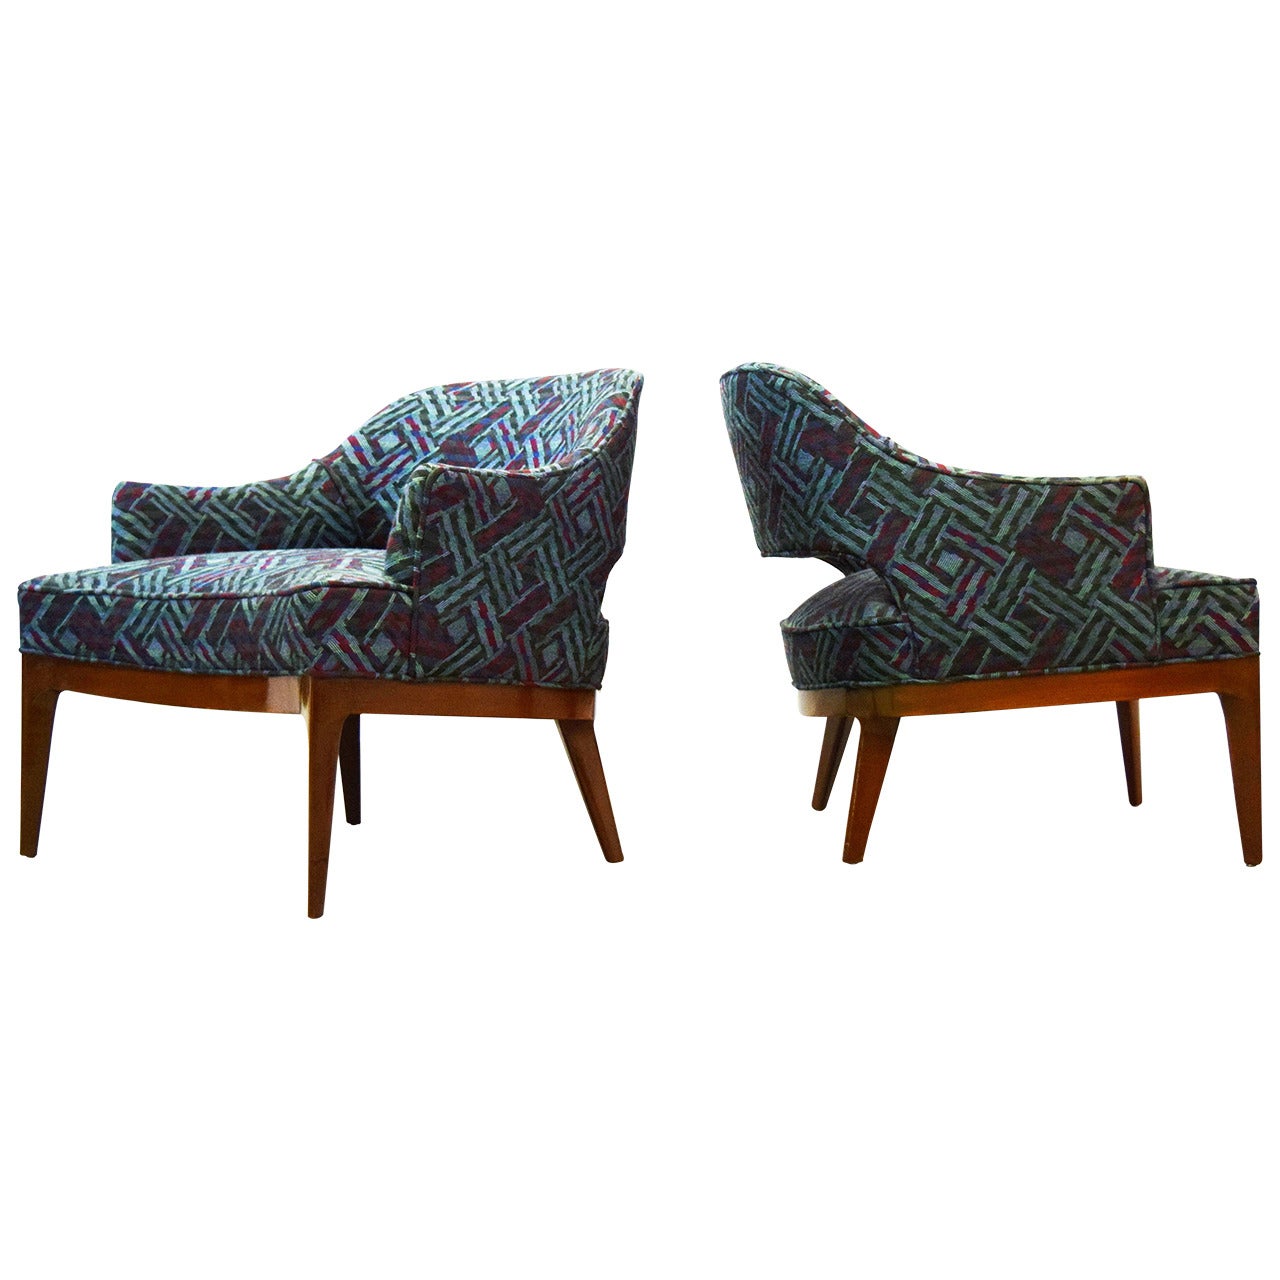 Pair of Harvey Probber Lounge Chairs